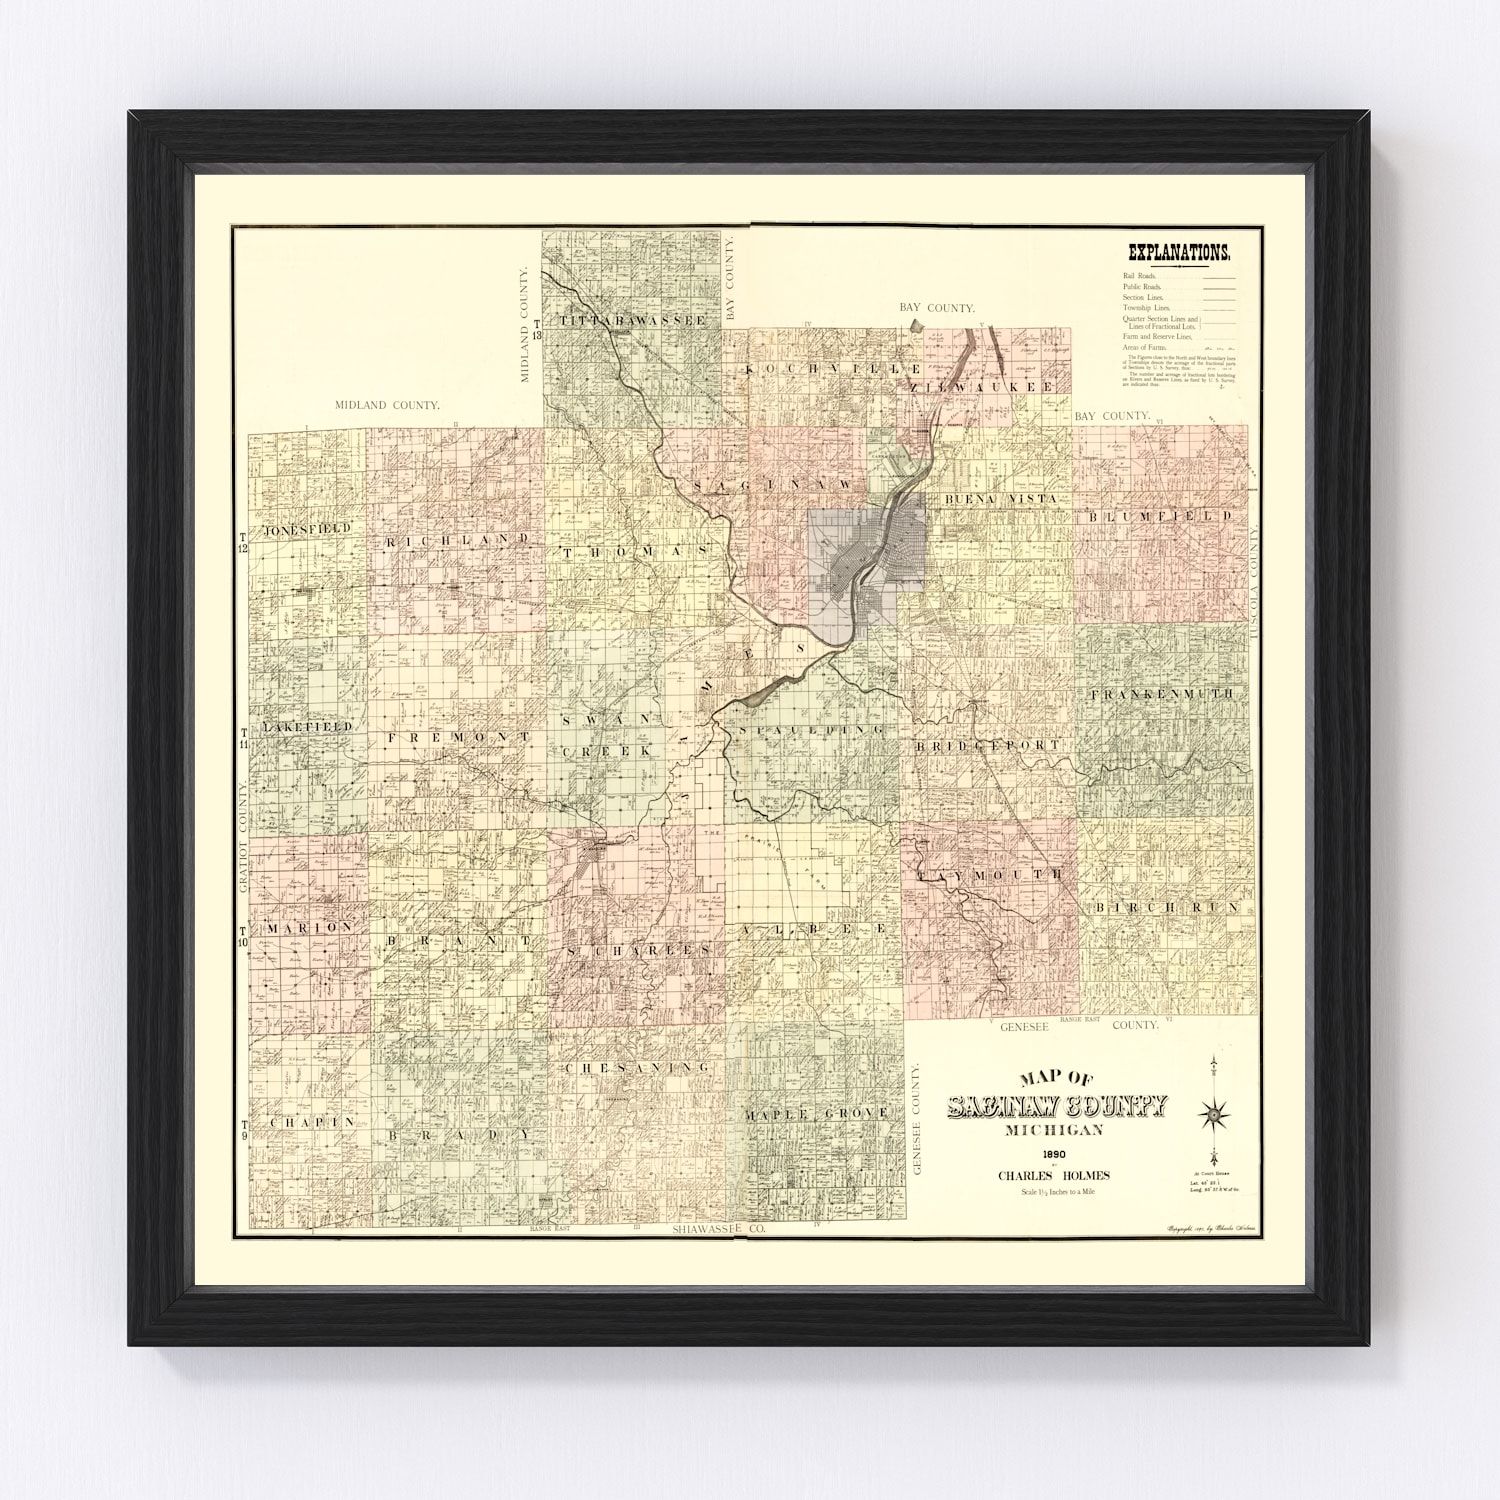 Vintage Map Of Saginaw County Michigan 1890 By Teds Vintage Art 0585